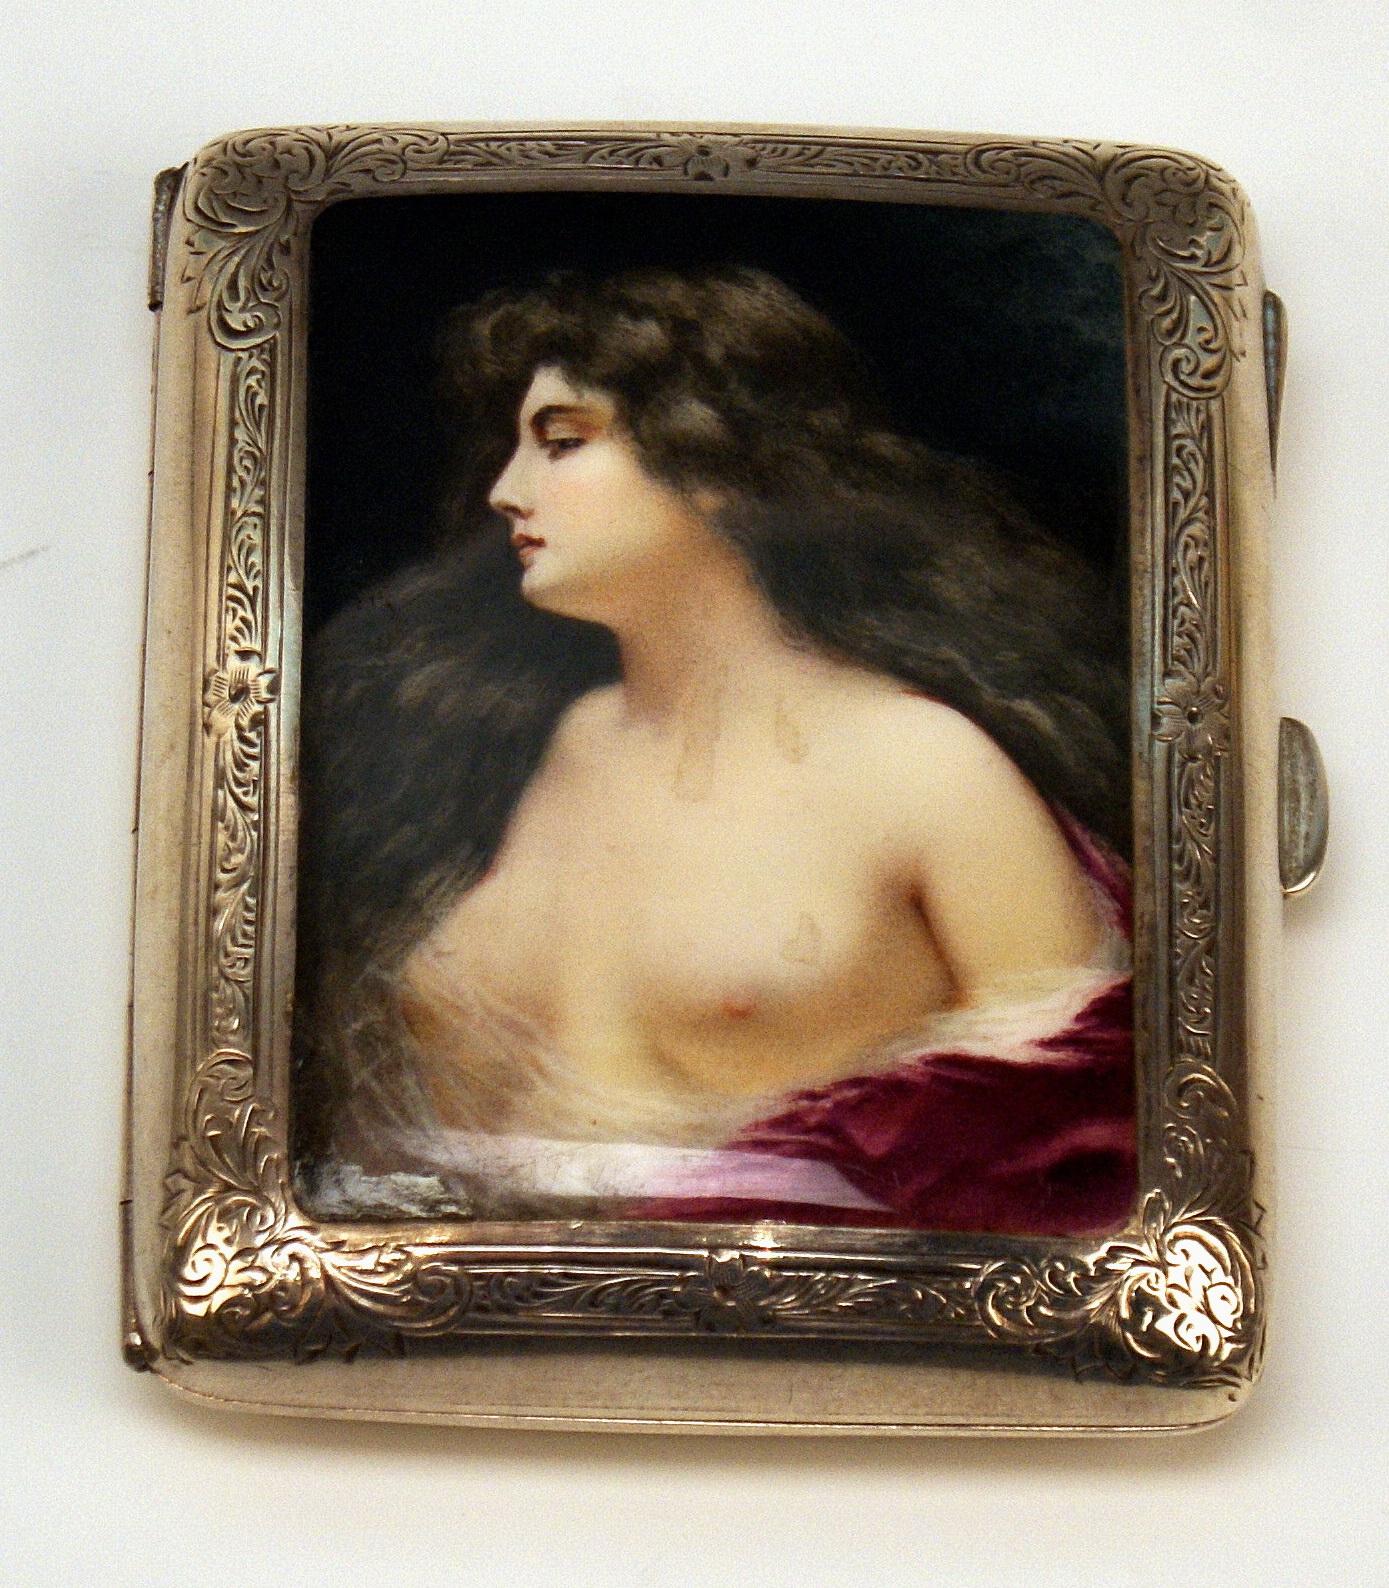 Stunning sterling silver 925 cigarette box / case with enamel painting covering lid:
View of a handsome long-haired lady, with bare-breasted upper body.

The lid is decorated with a finest enamel picture as mentioned above:
The lady's face